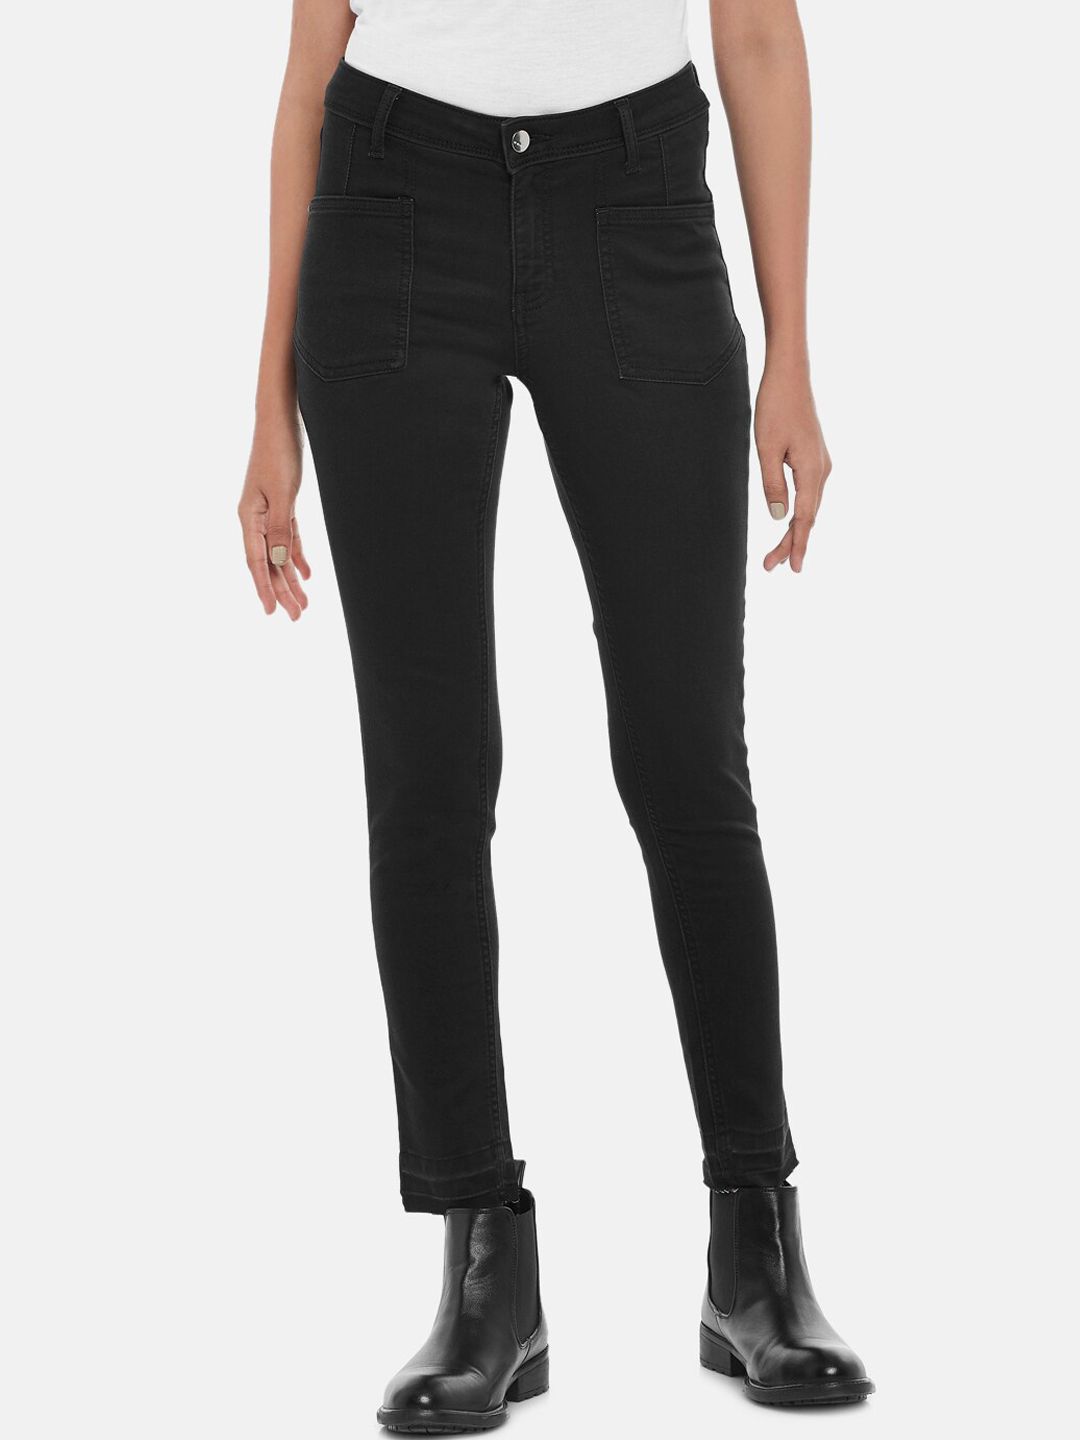 SF JEANS by Pantaloons Women Black Skinny Fit Jeans Price in India